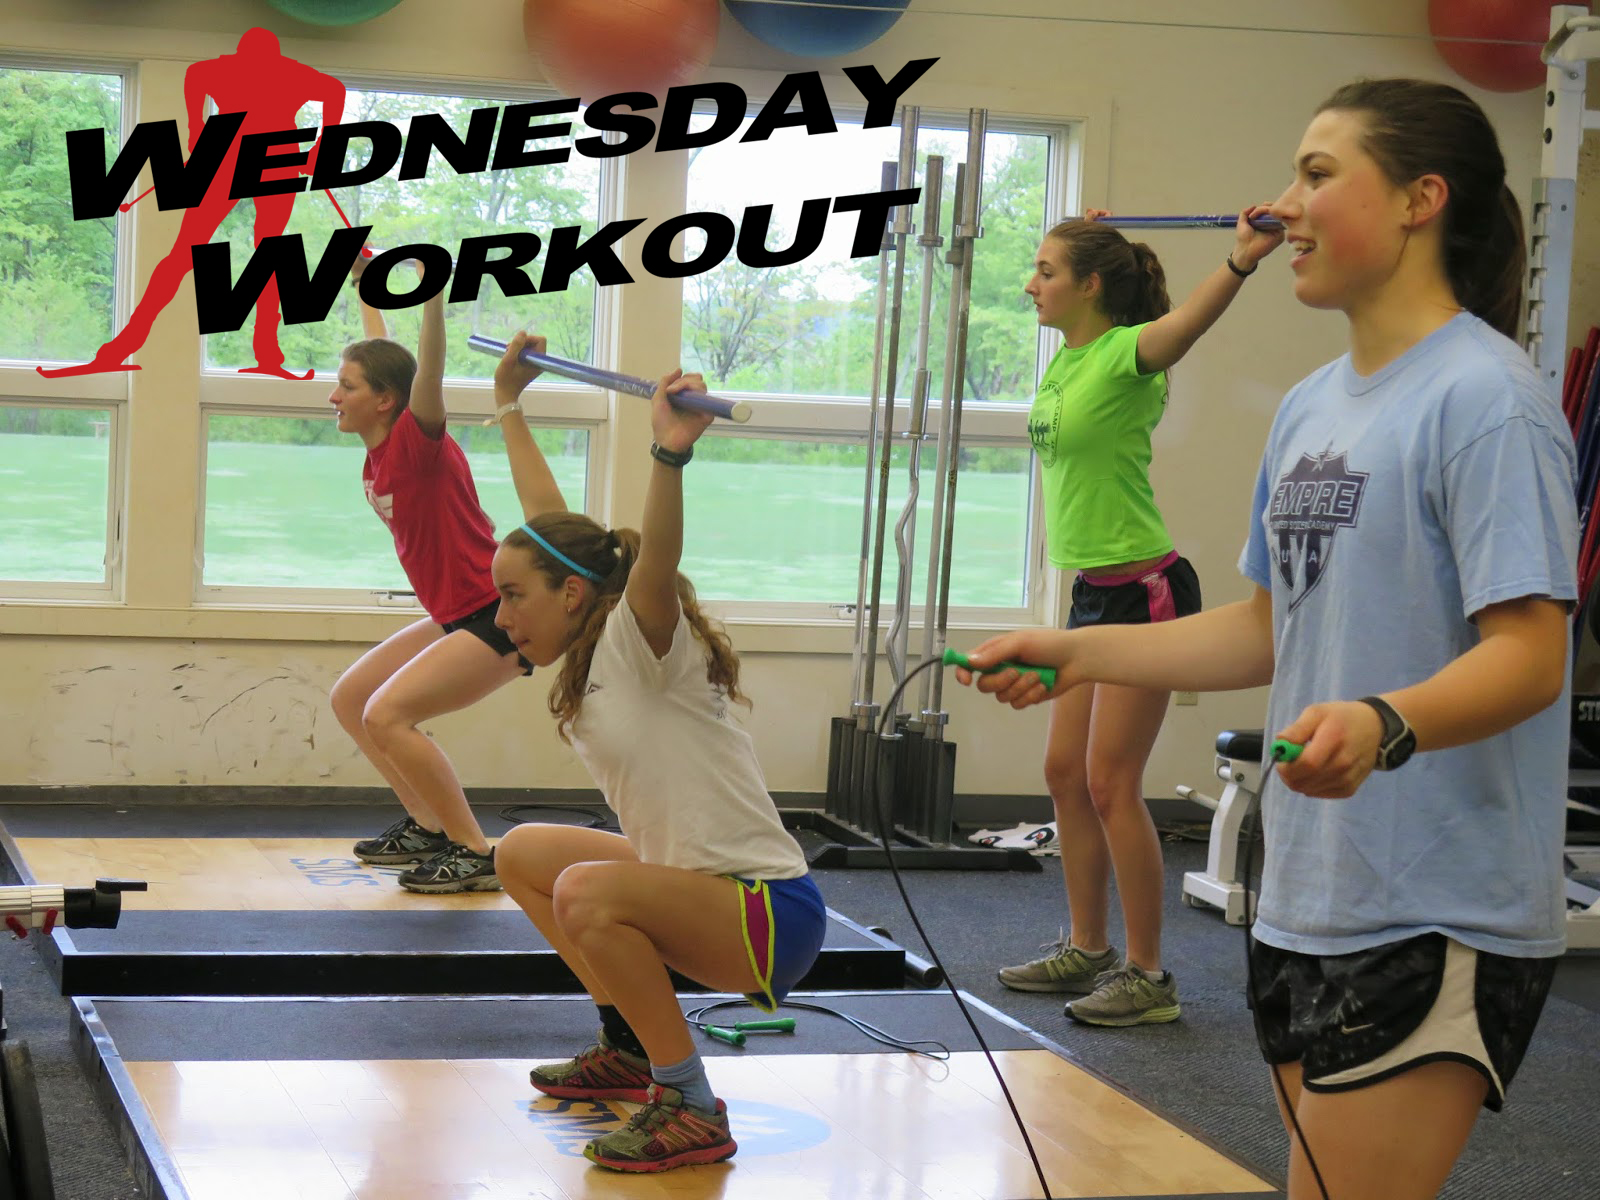 Wednesday Workout: Laying the Foundation with SMS and Sverre Caldwell